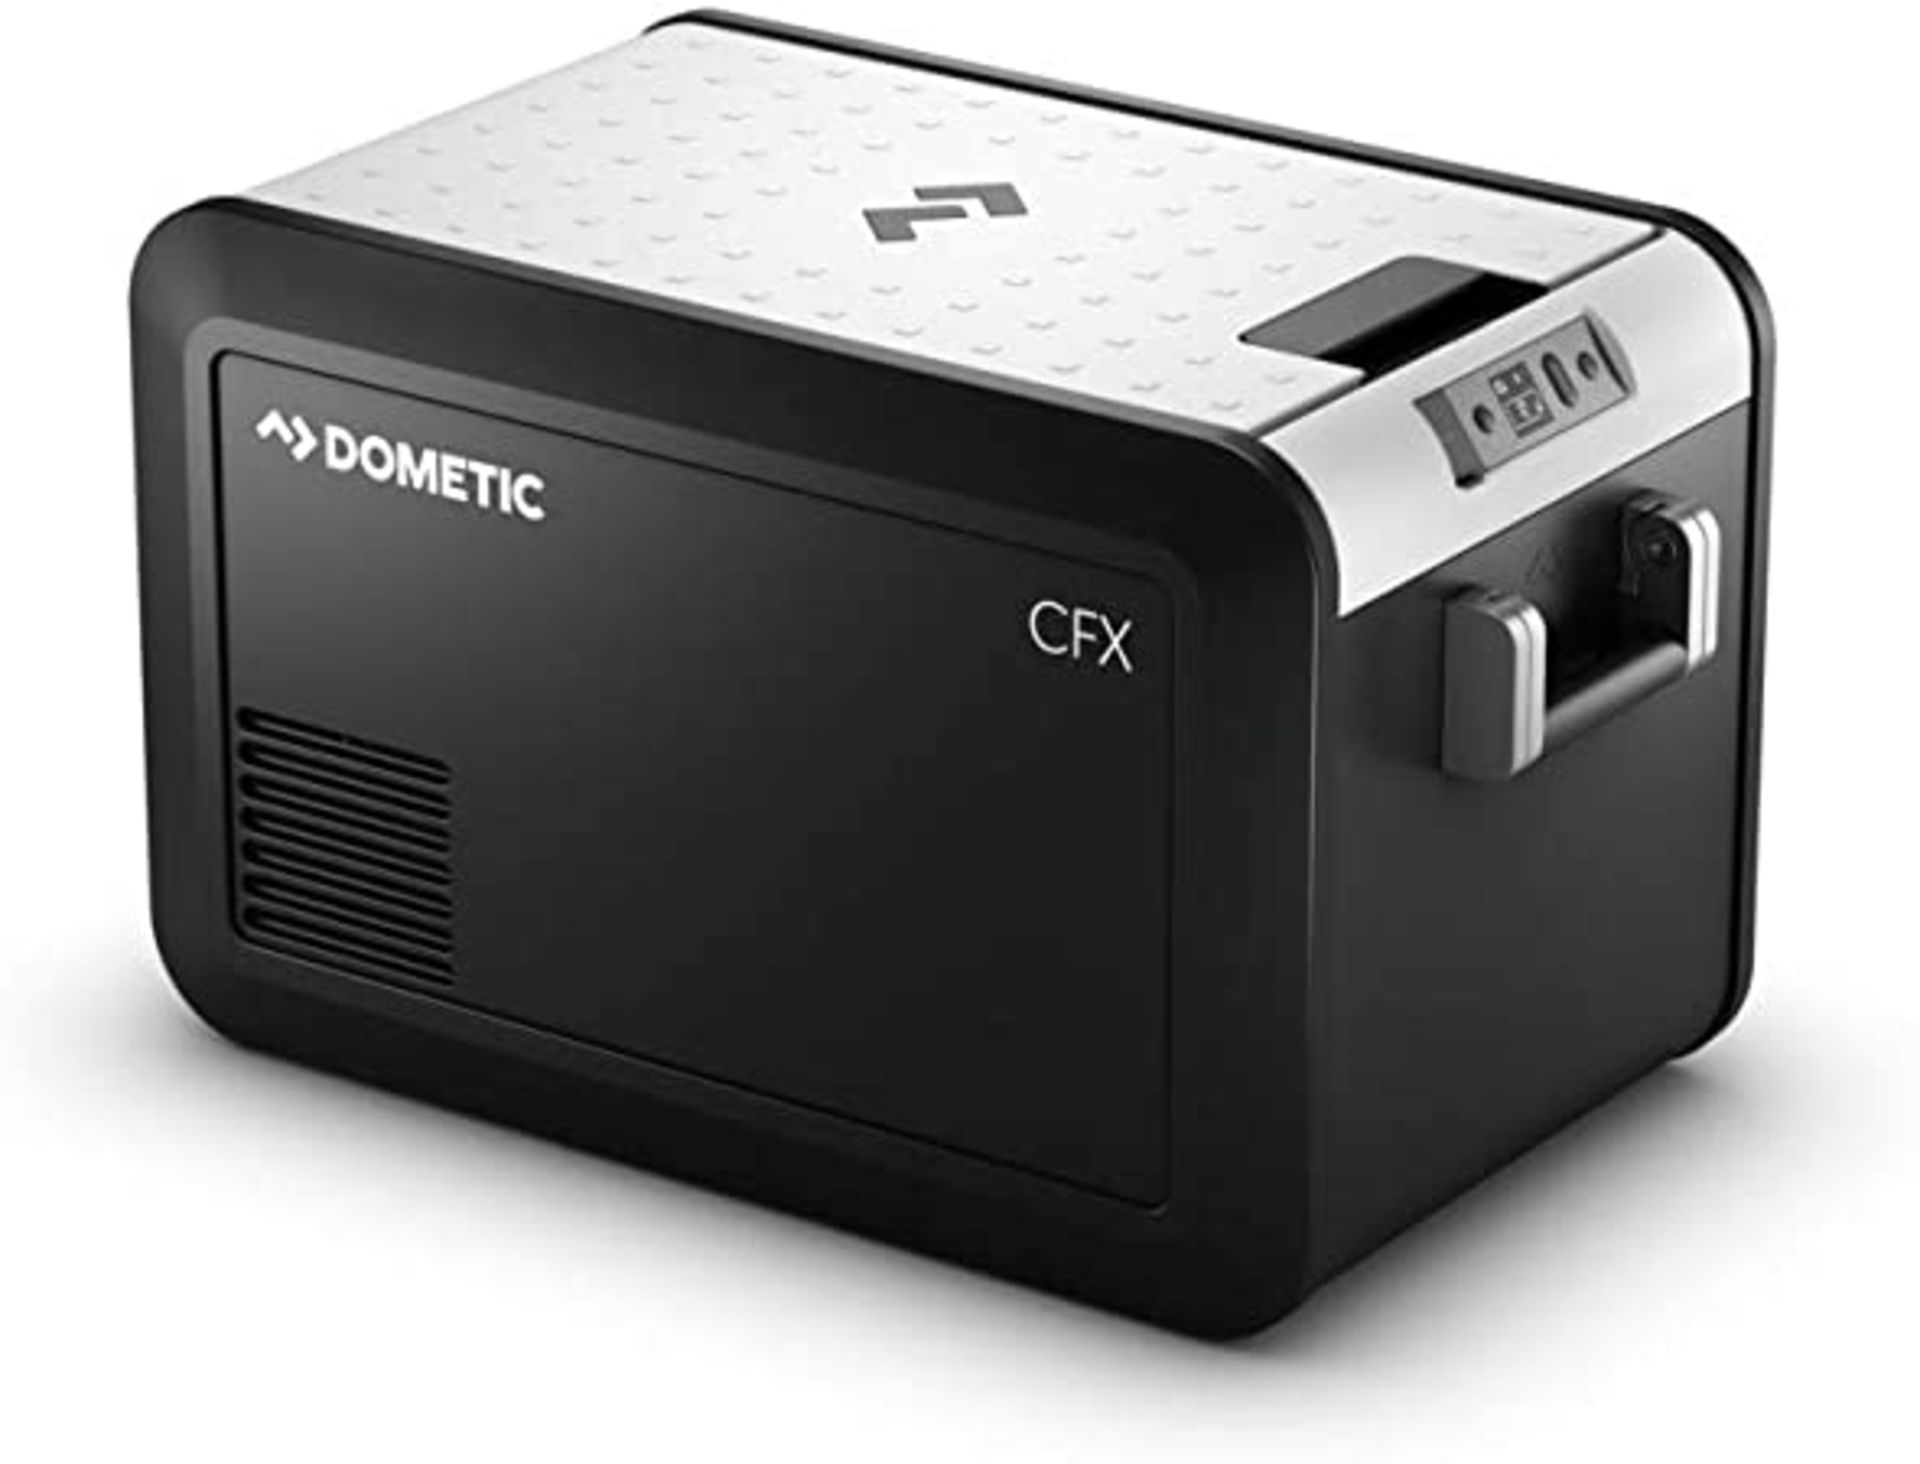 1 x Dometic CFX3 35 Portable 32l Compressor Cooler and Freezer - Features Bluetooth and WiFi - Image 5 of 5